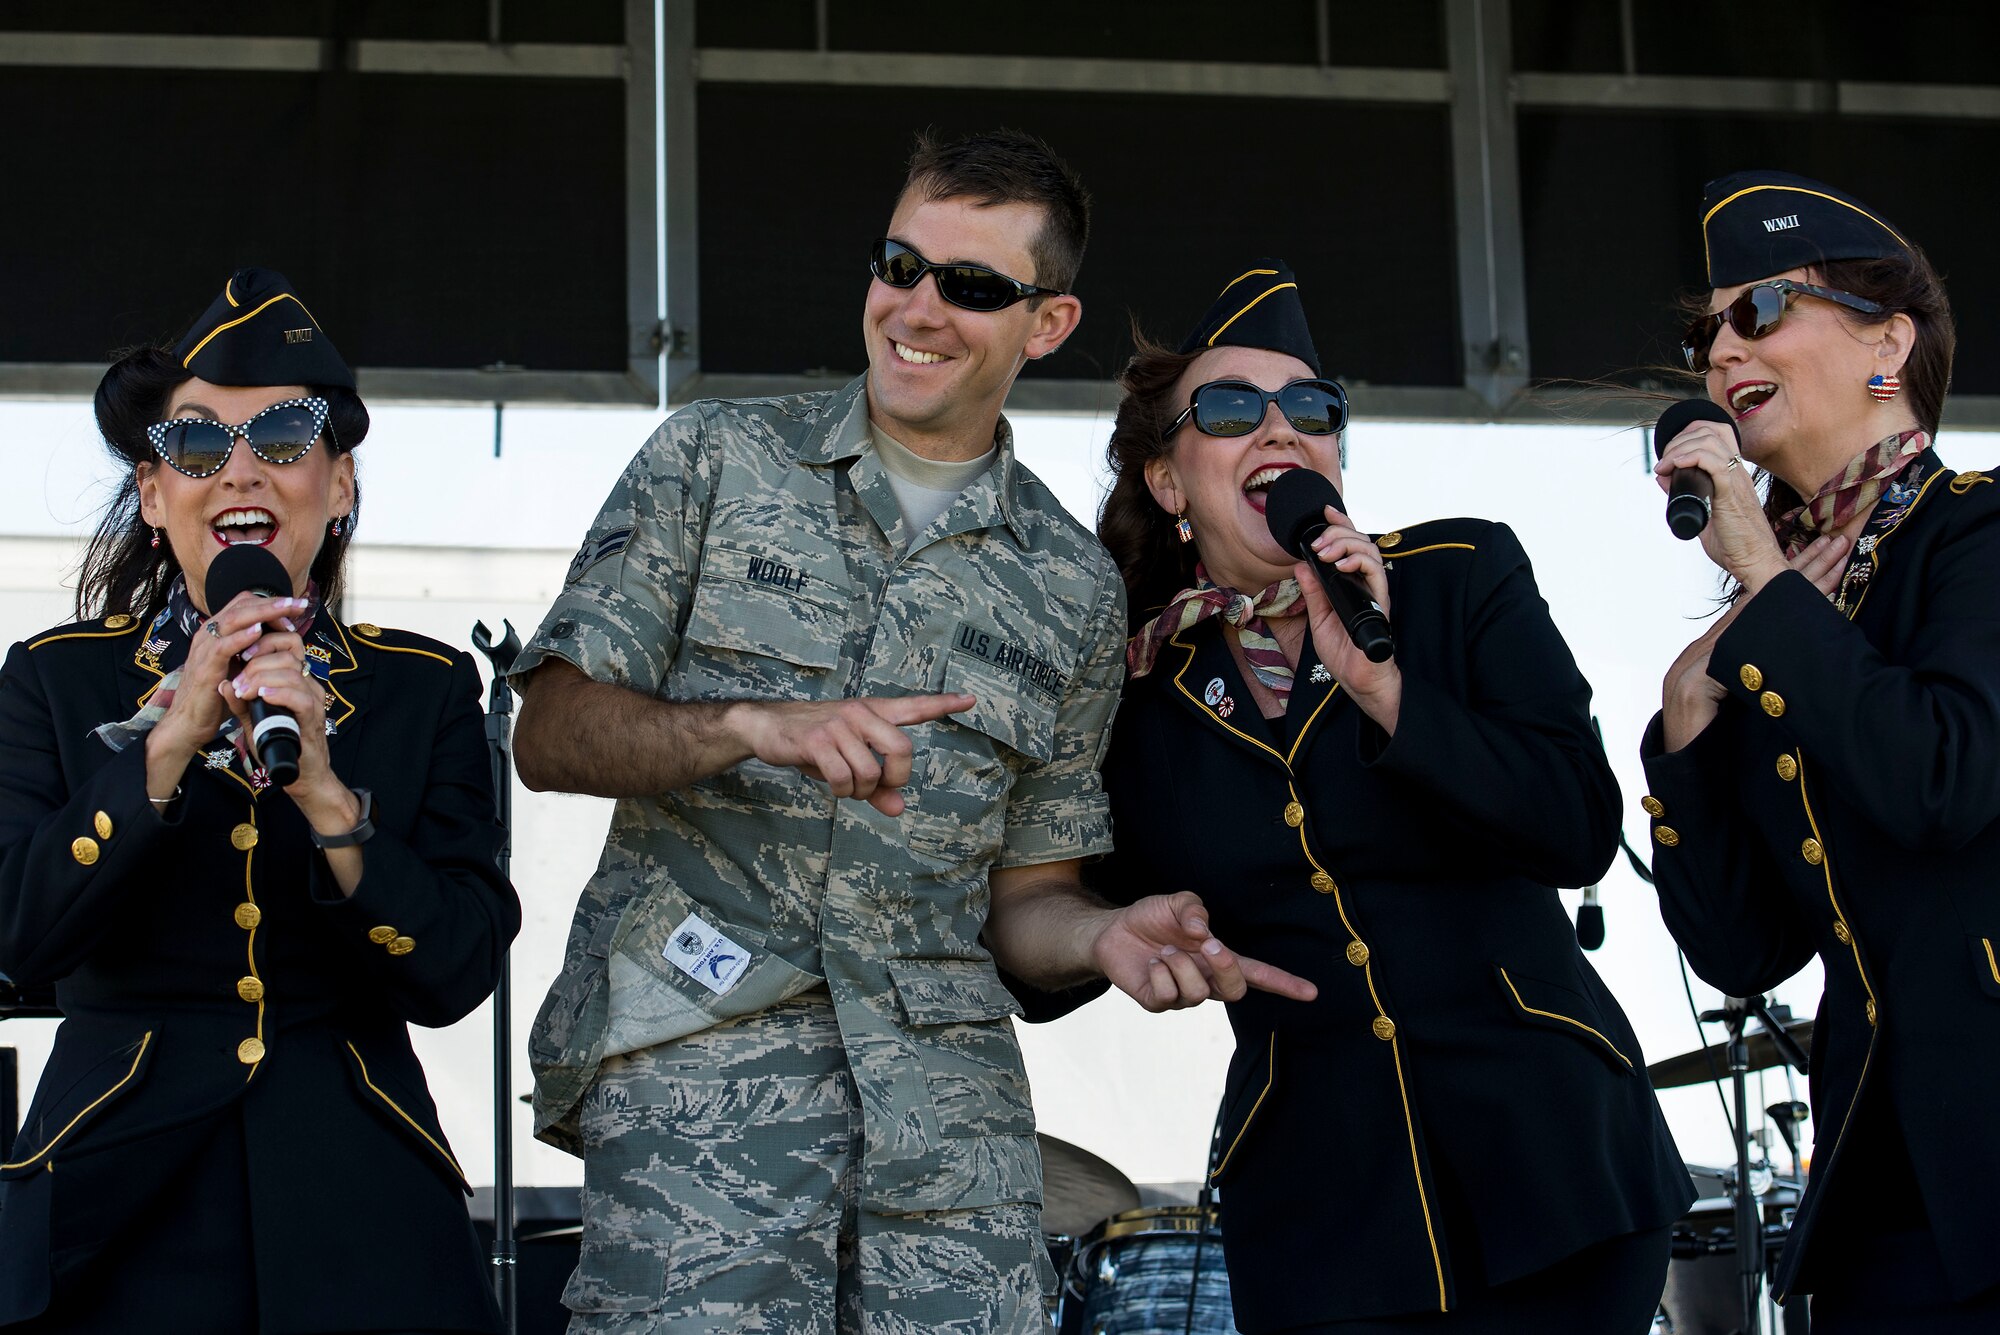 The Ladies for Liberty sing a song with Airman 1st Class Jim Woolf, Band of Mid-America audio engineer, during the Scott Airshow and Open House at Scott Air Force Base, Ill., June 11, 2017. Ladies for Liberty is a singing troupe dedicated to performing the Andrew Sisters style of music through their own rendition of vocals, costumes, hairstyles, and the spirit of patriotism reminiscent of the 1940s. (U.S. Air Force photo by Tech. Sgt. Jonathan Fowler)